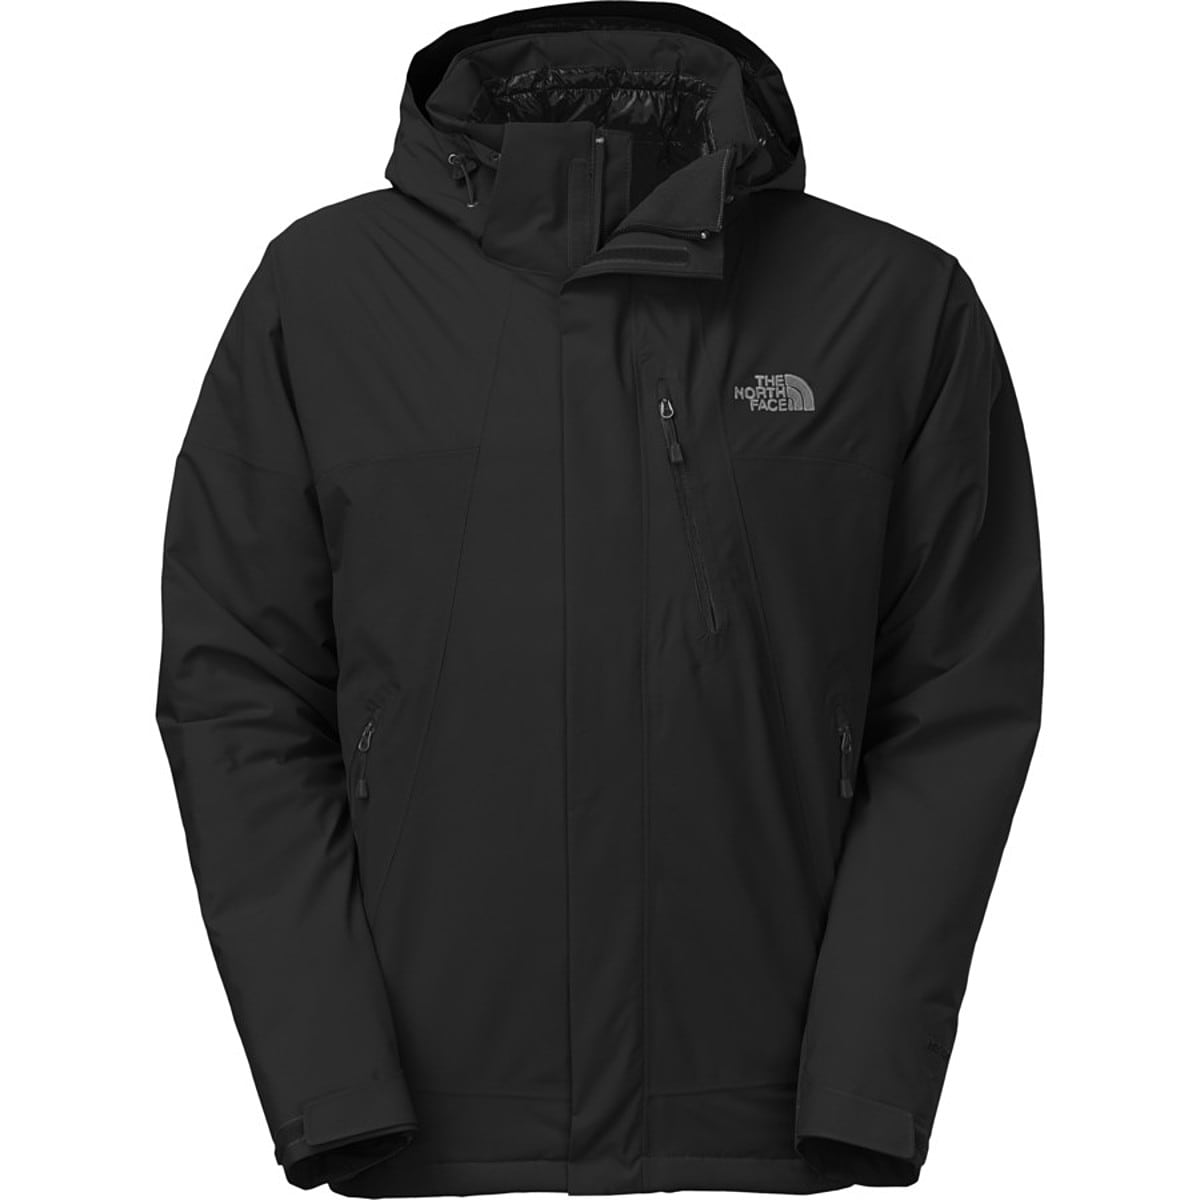 The North Face Plasma Thermal Jacket - Trailspace.com